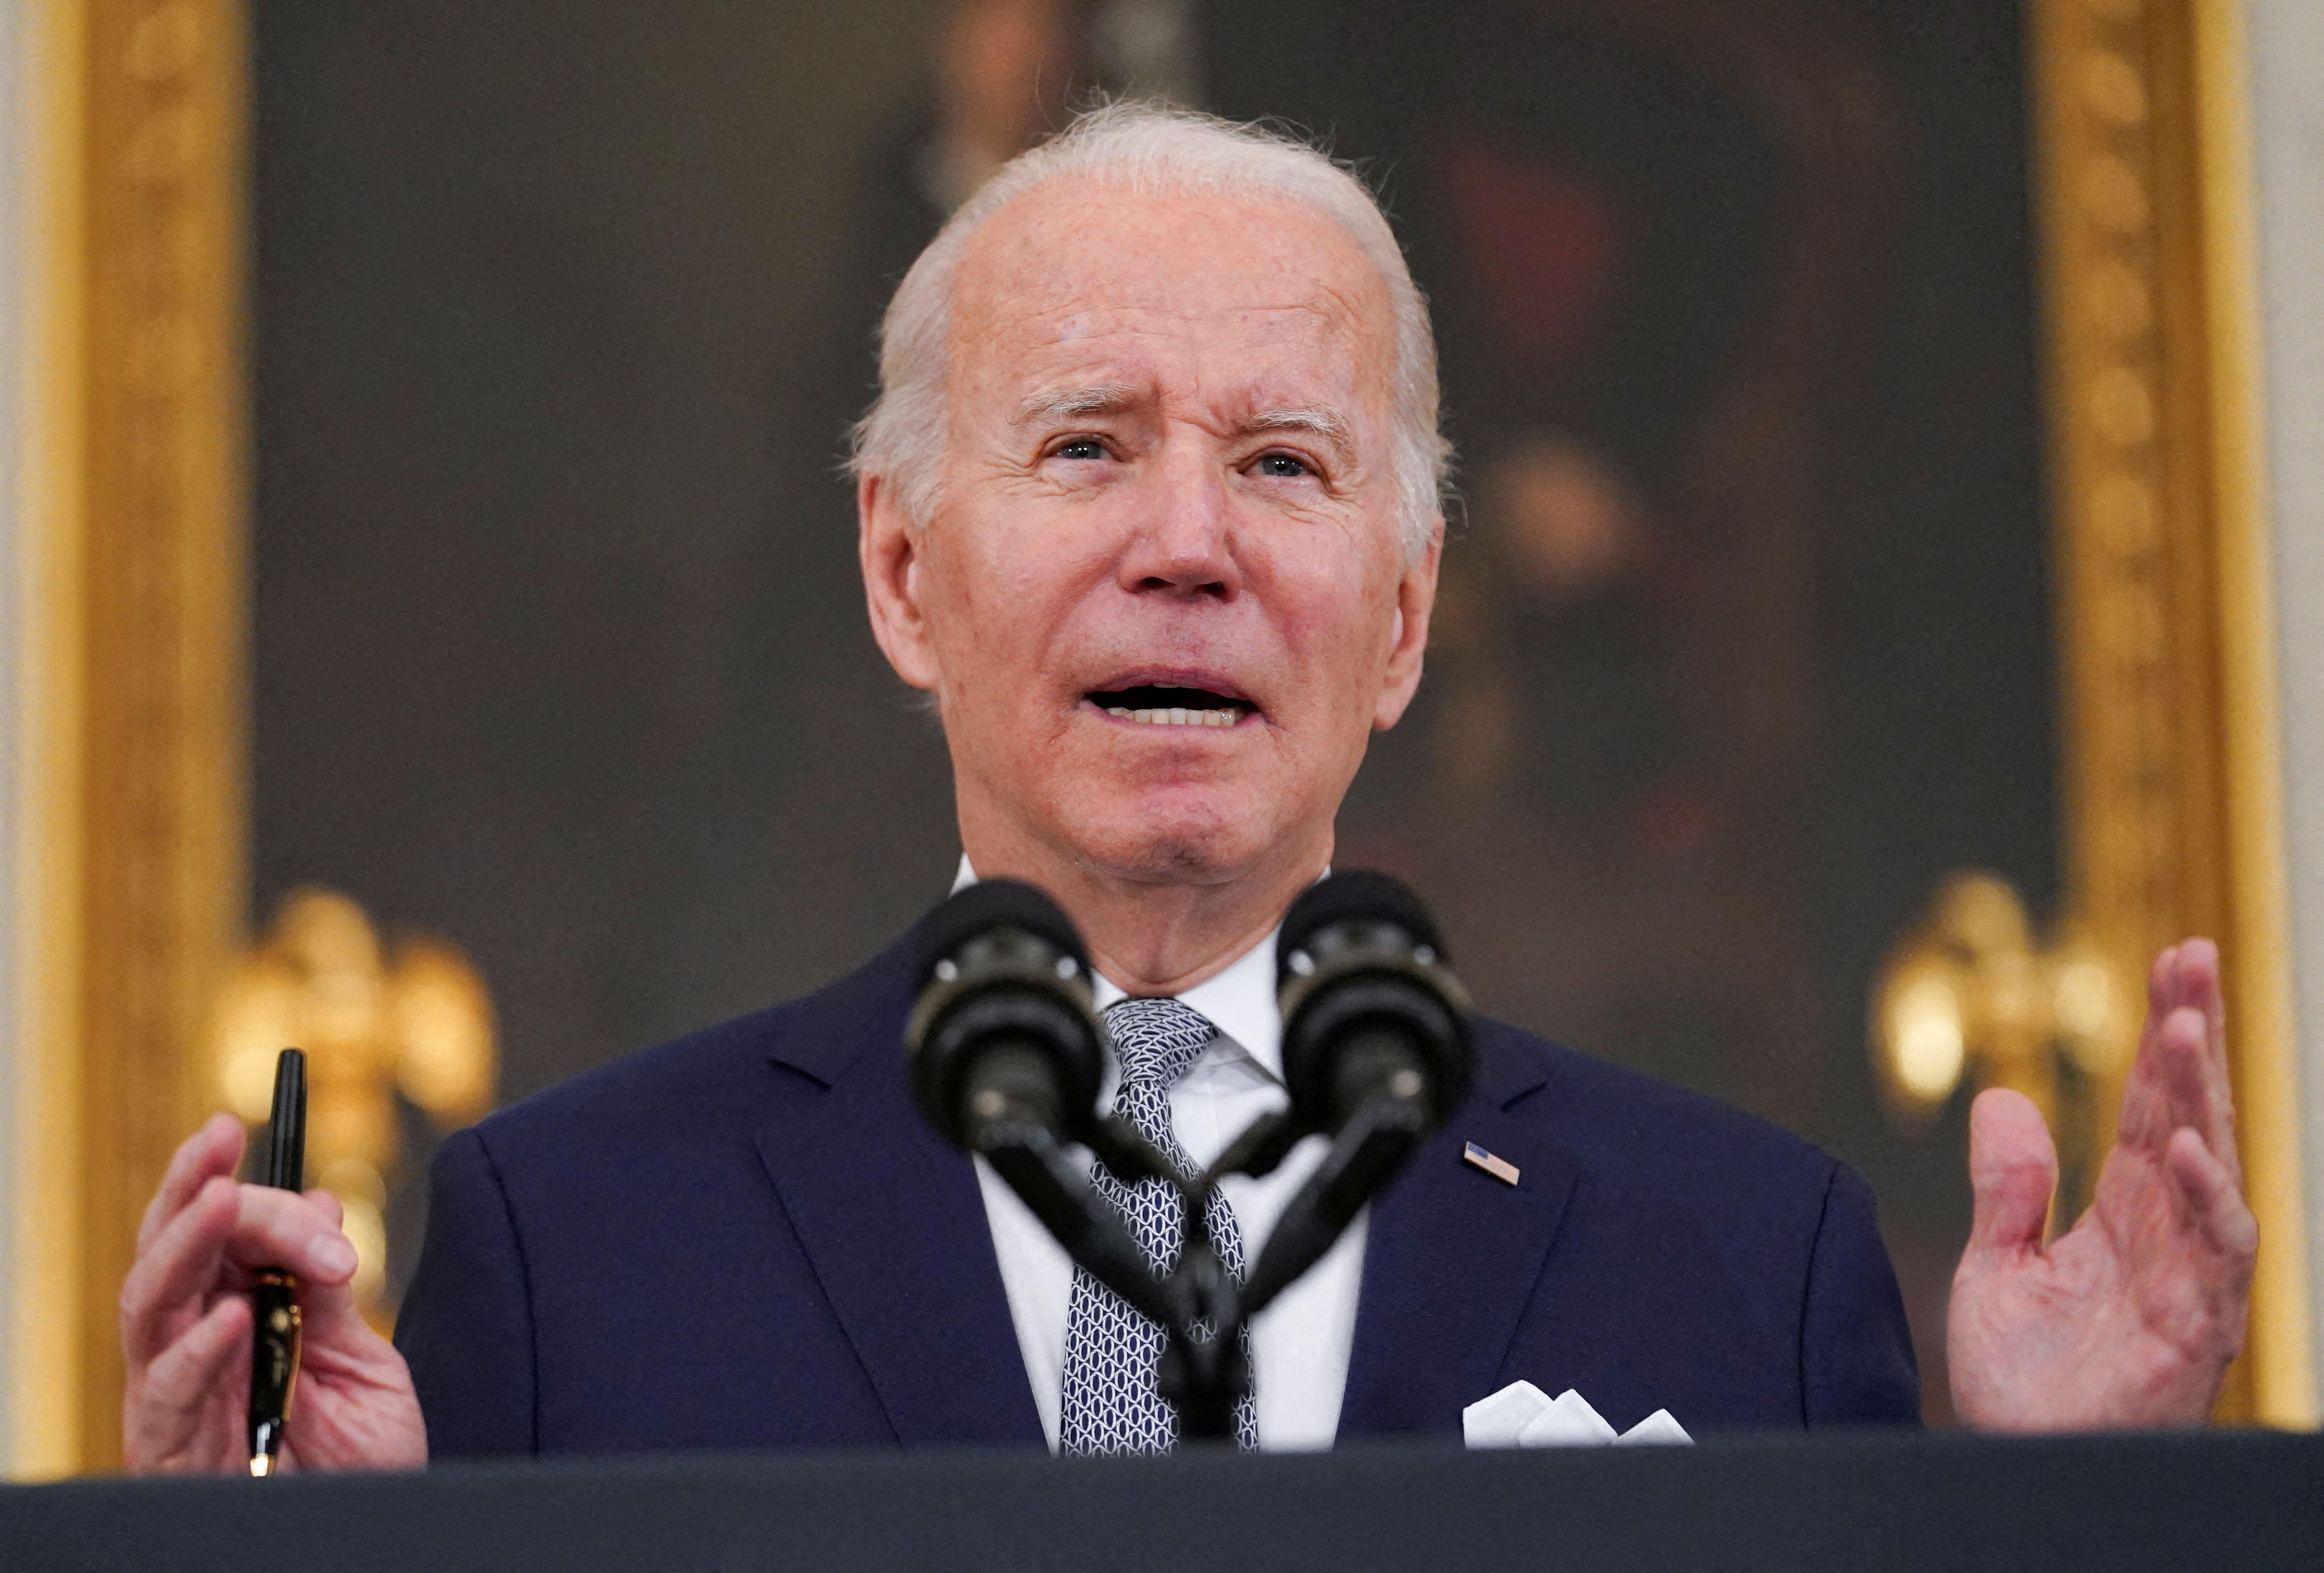 U.S. President Joe Biden delivers remarks on the December 2021 jobs report during a speech in the State Dining Room at the White House in Washington, U.S., January 7, 2022. REUTERS/Kevin Lamarque